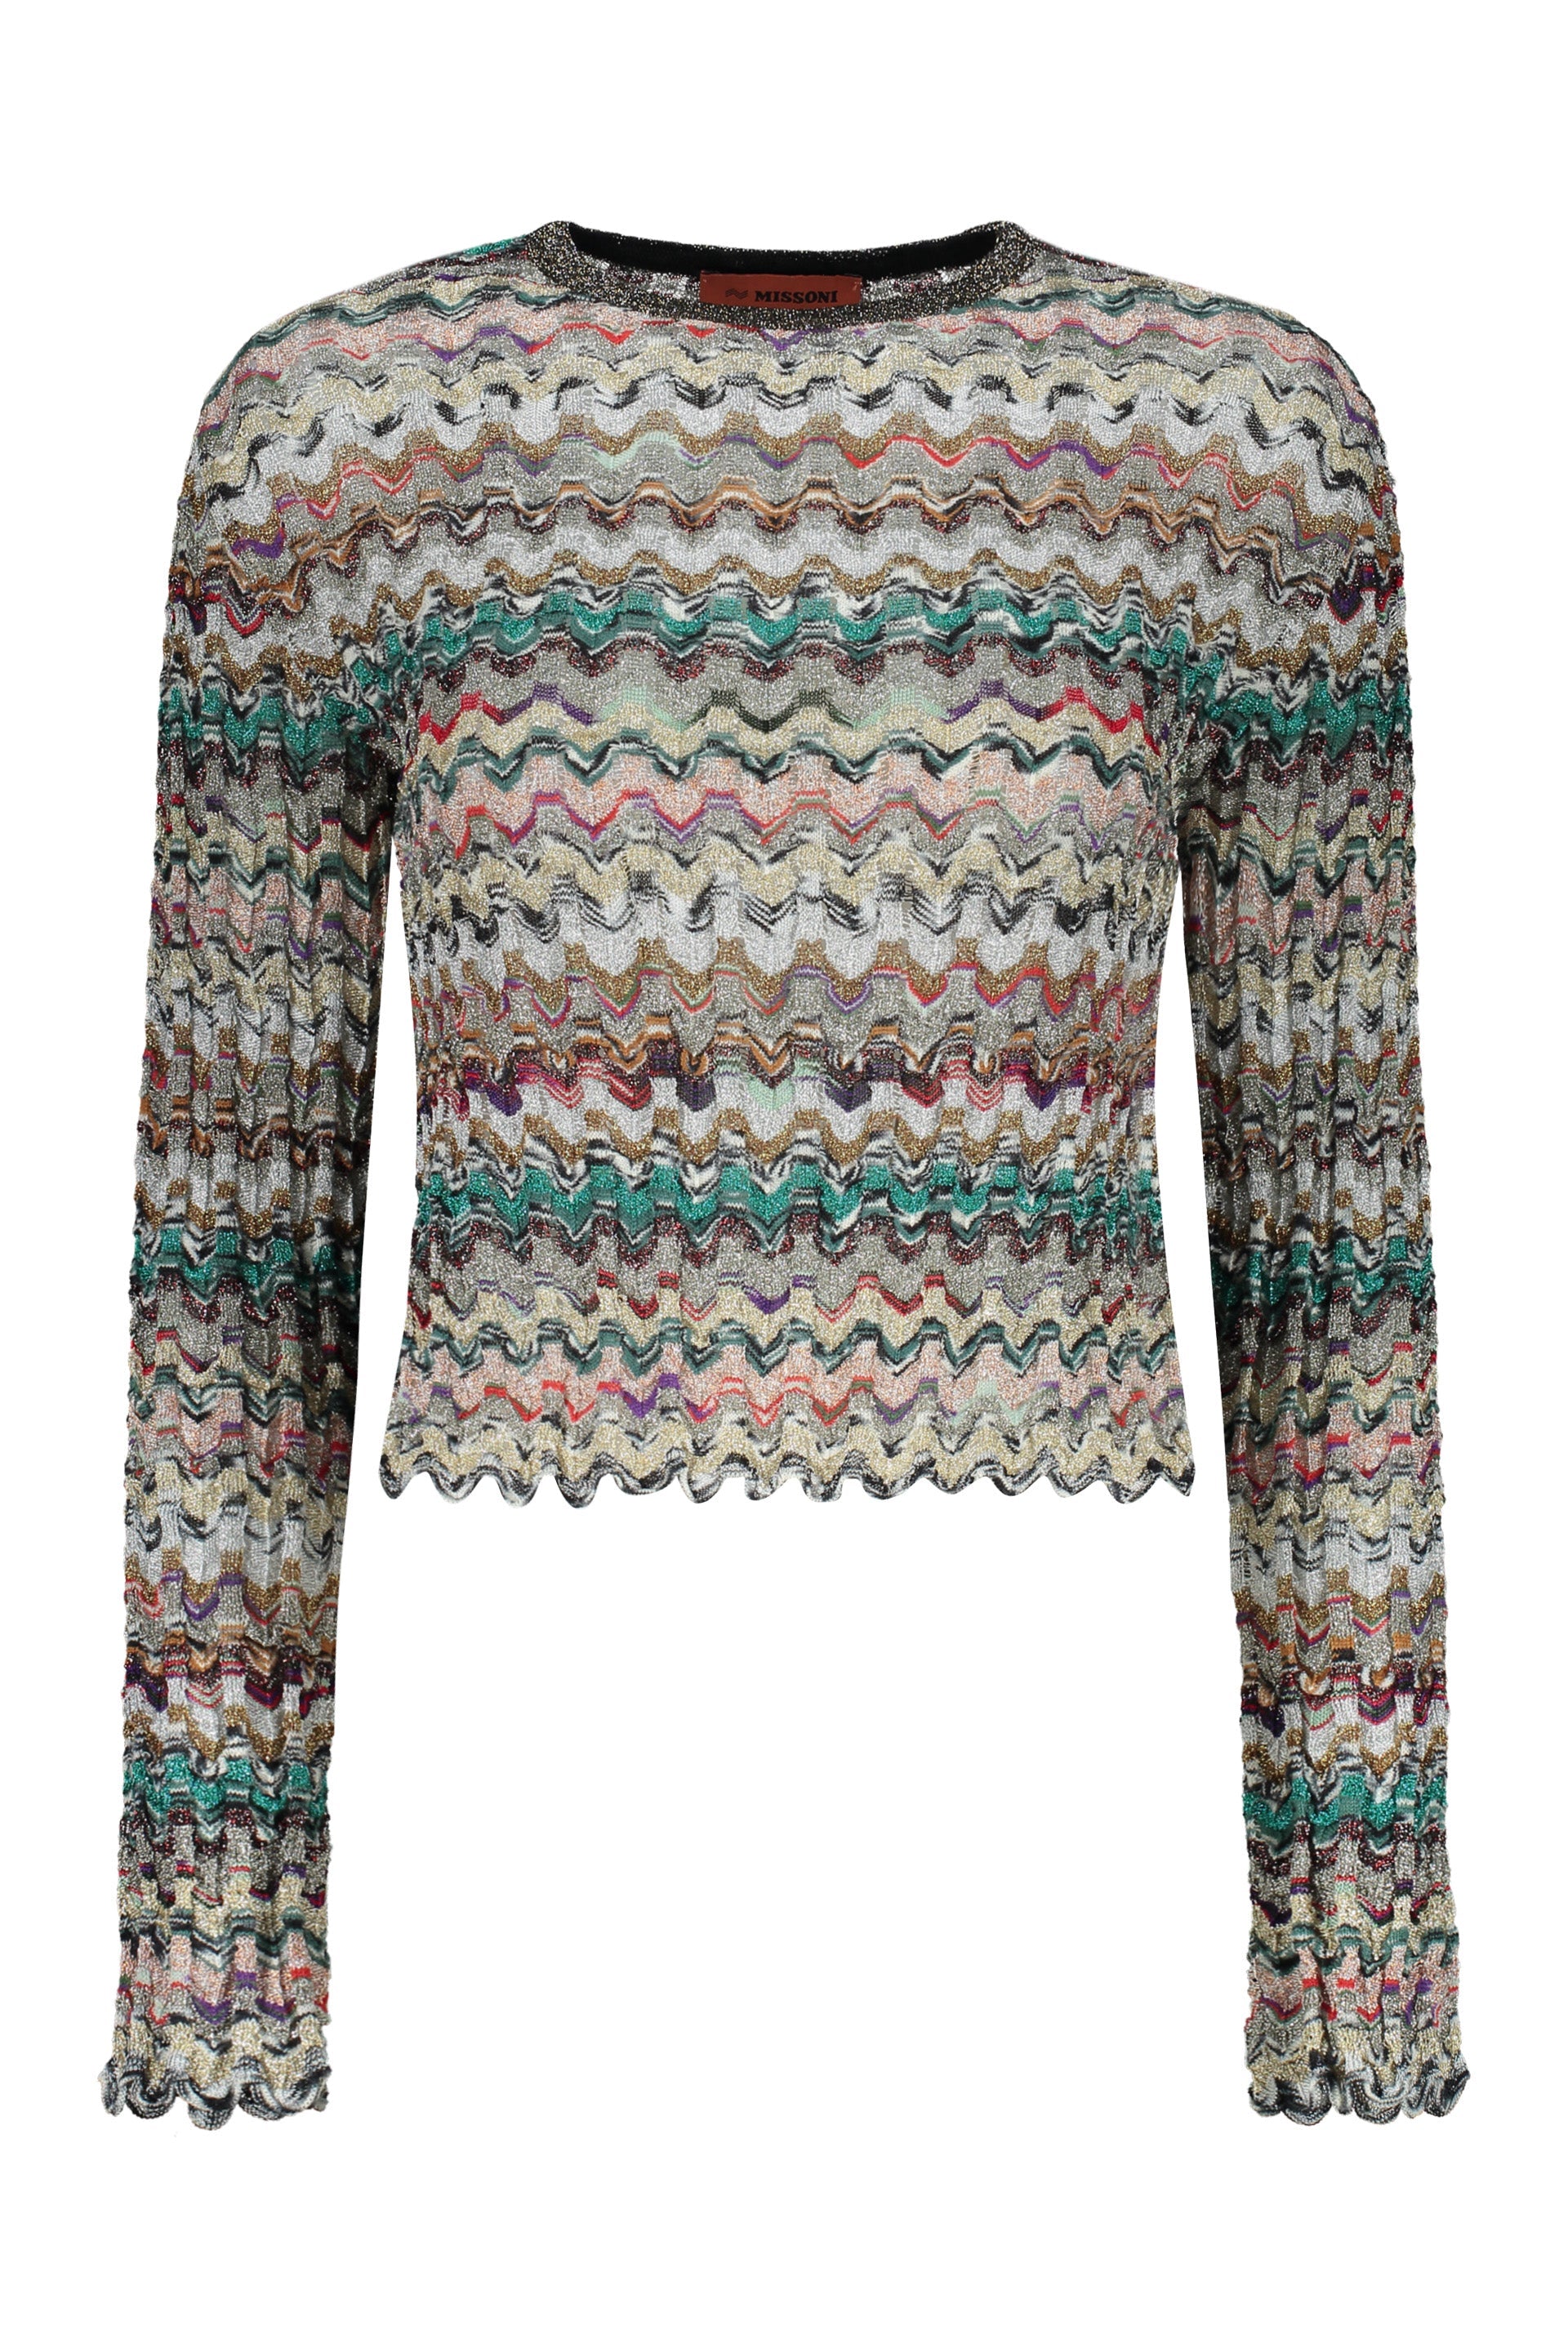 Missoni-OUTLET-SALE-Ribbed-crew-neck-sweater-Strick-40-ARCHIVE-COLLECTION.jpg